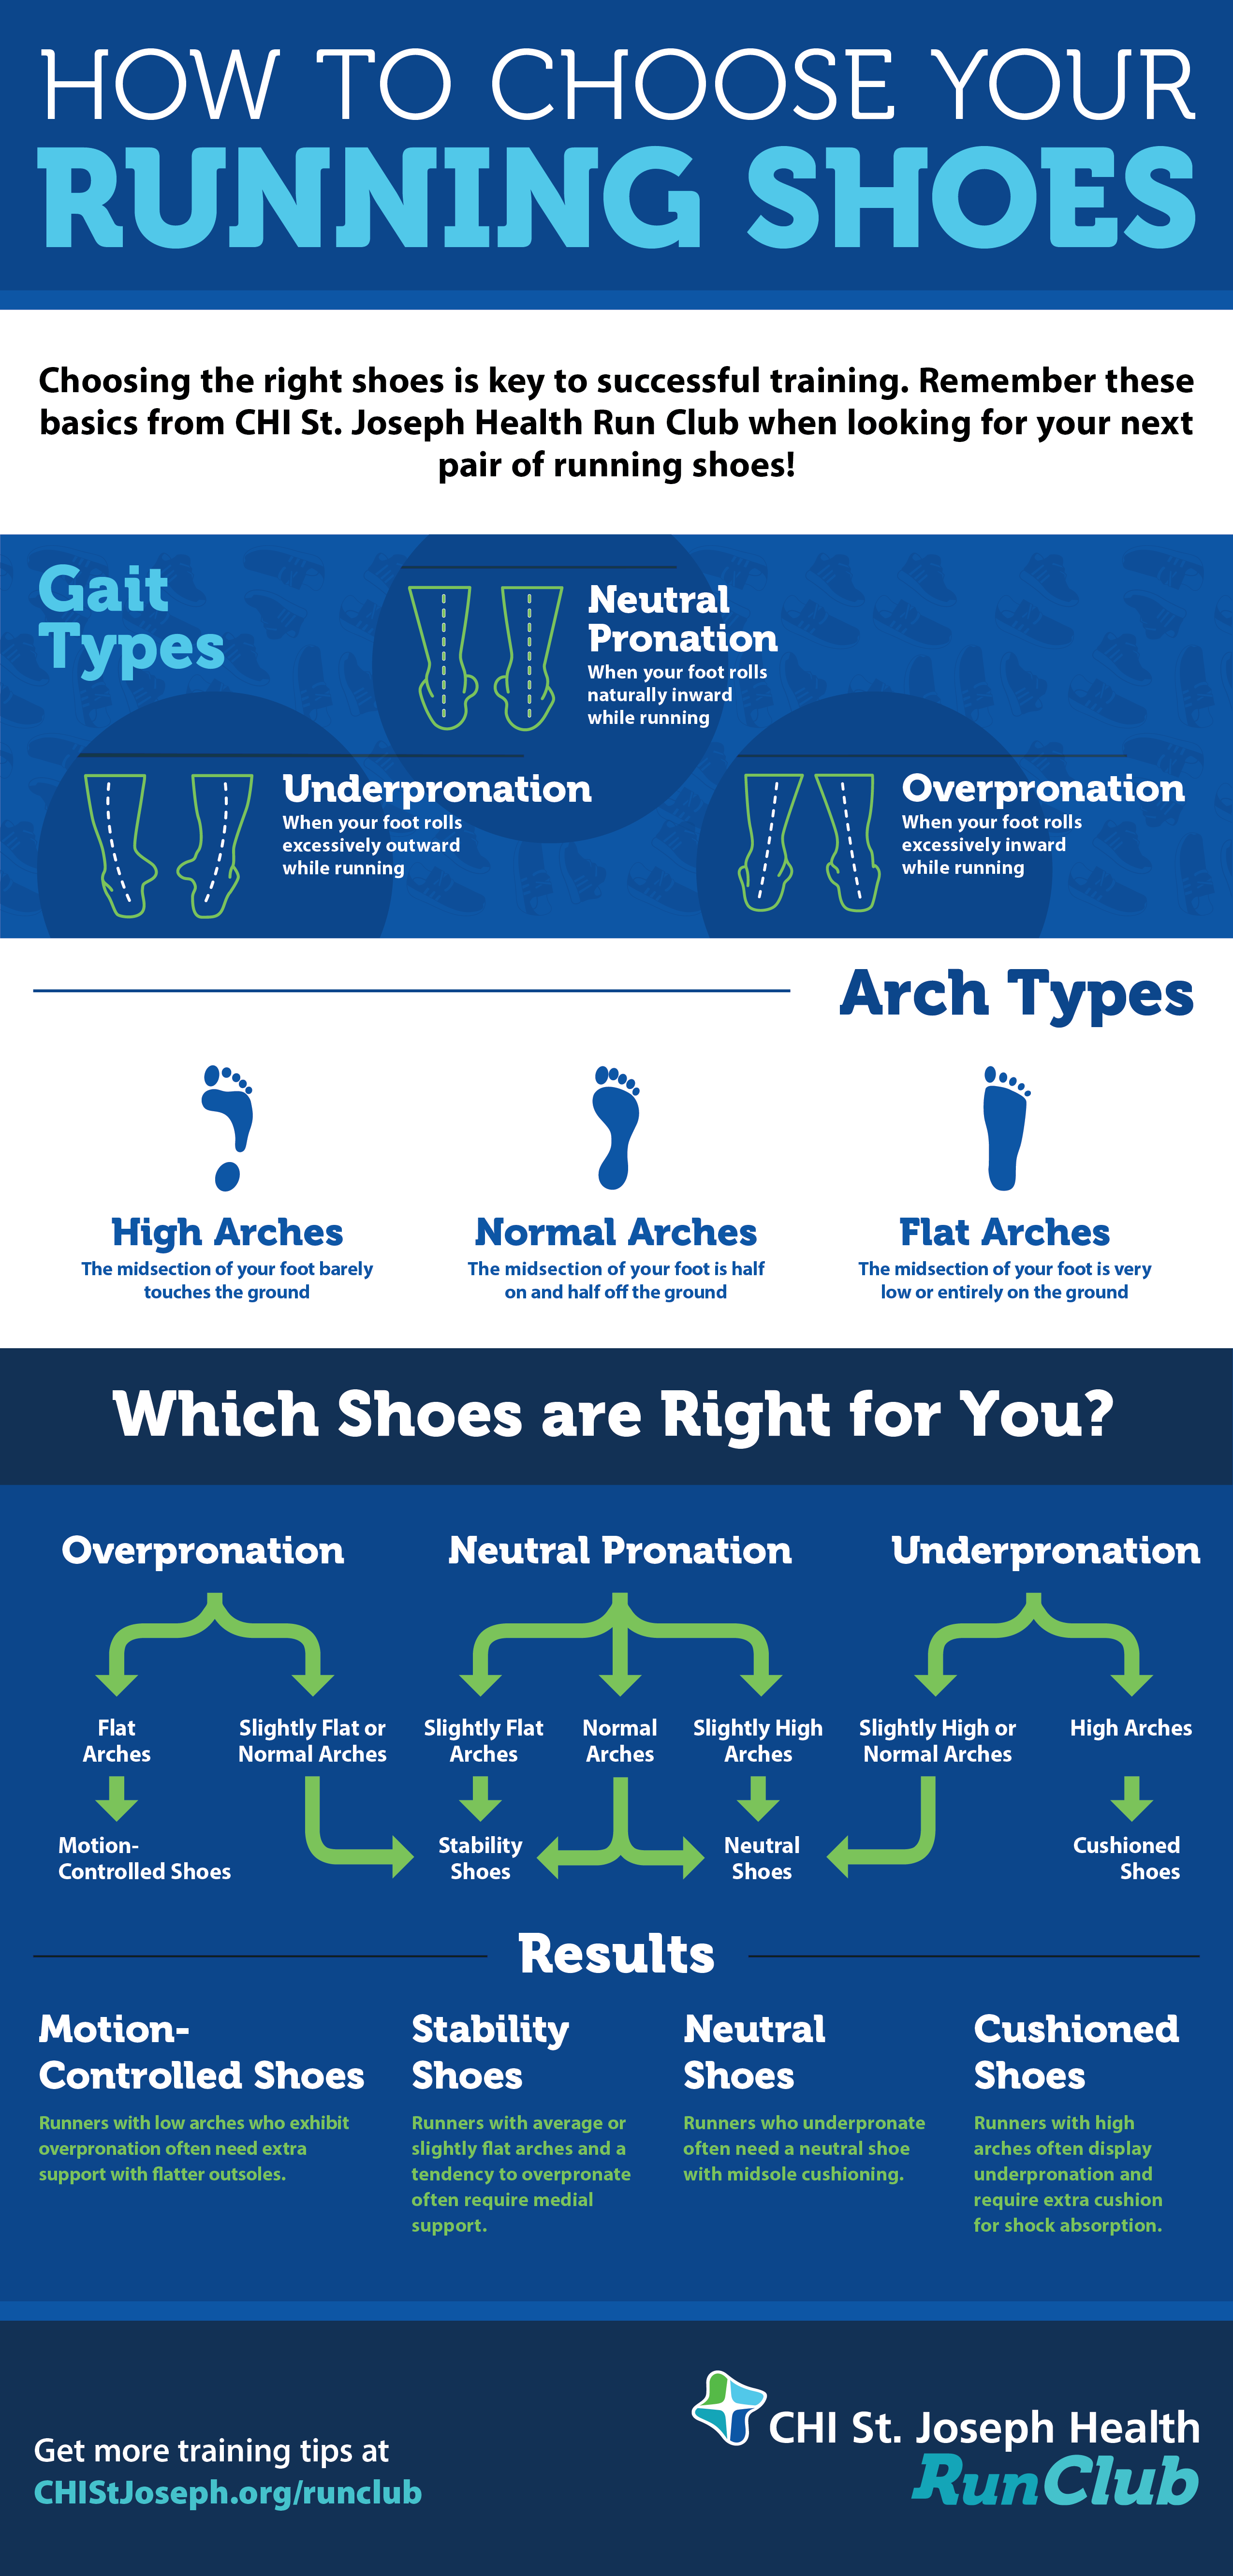 Anatomy of a Running Shoe - with Infographic